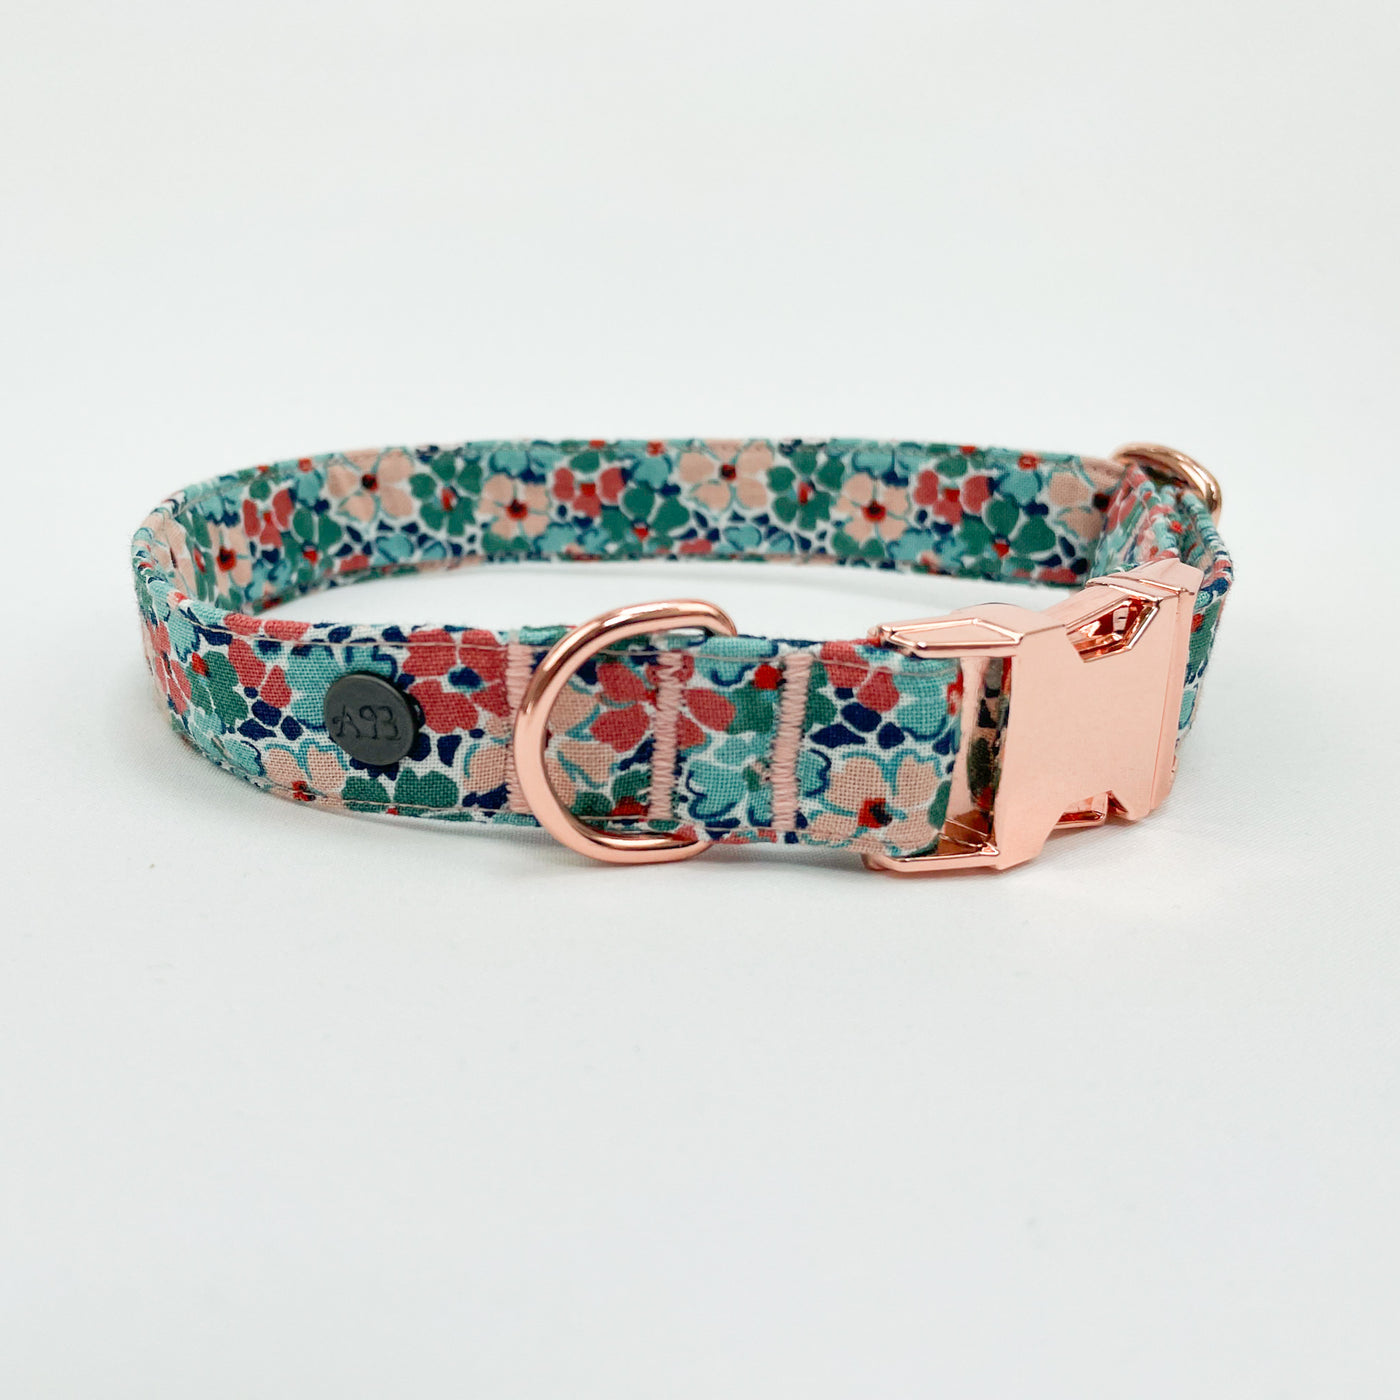 Liberty winter floral dog collar with rose gold buckle and hardware.